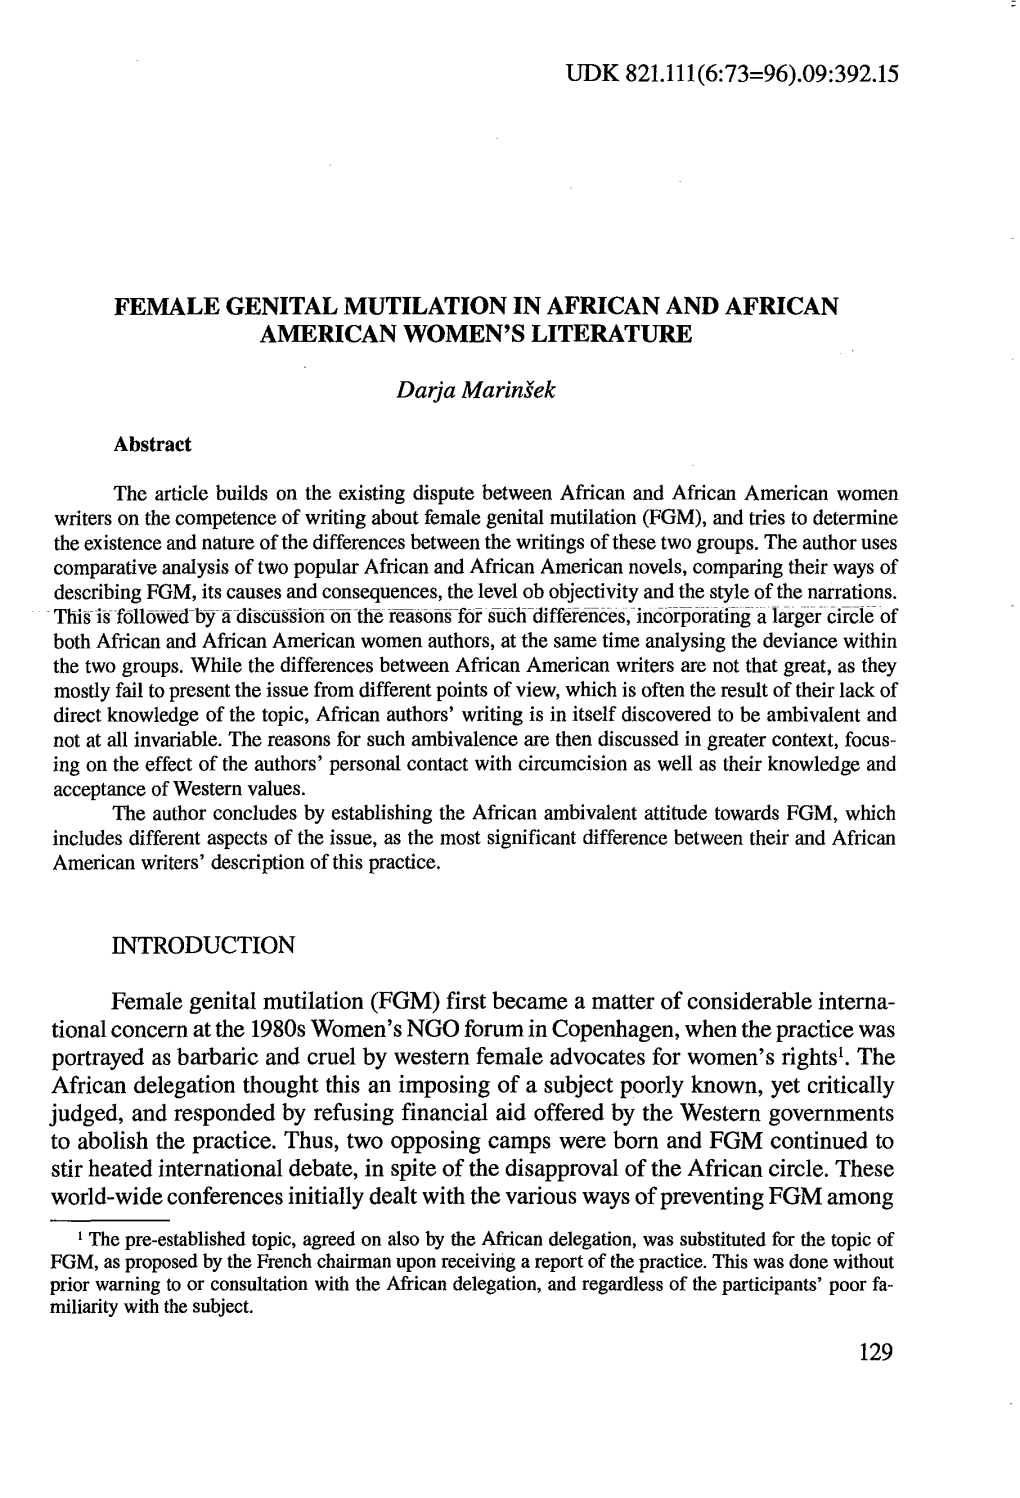 09:392.15 Female Genital Mutilation in African And